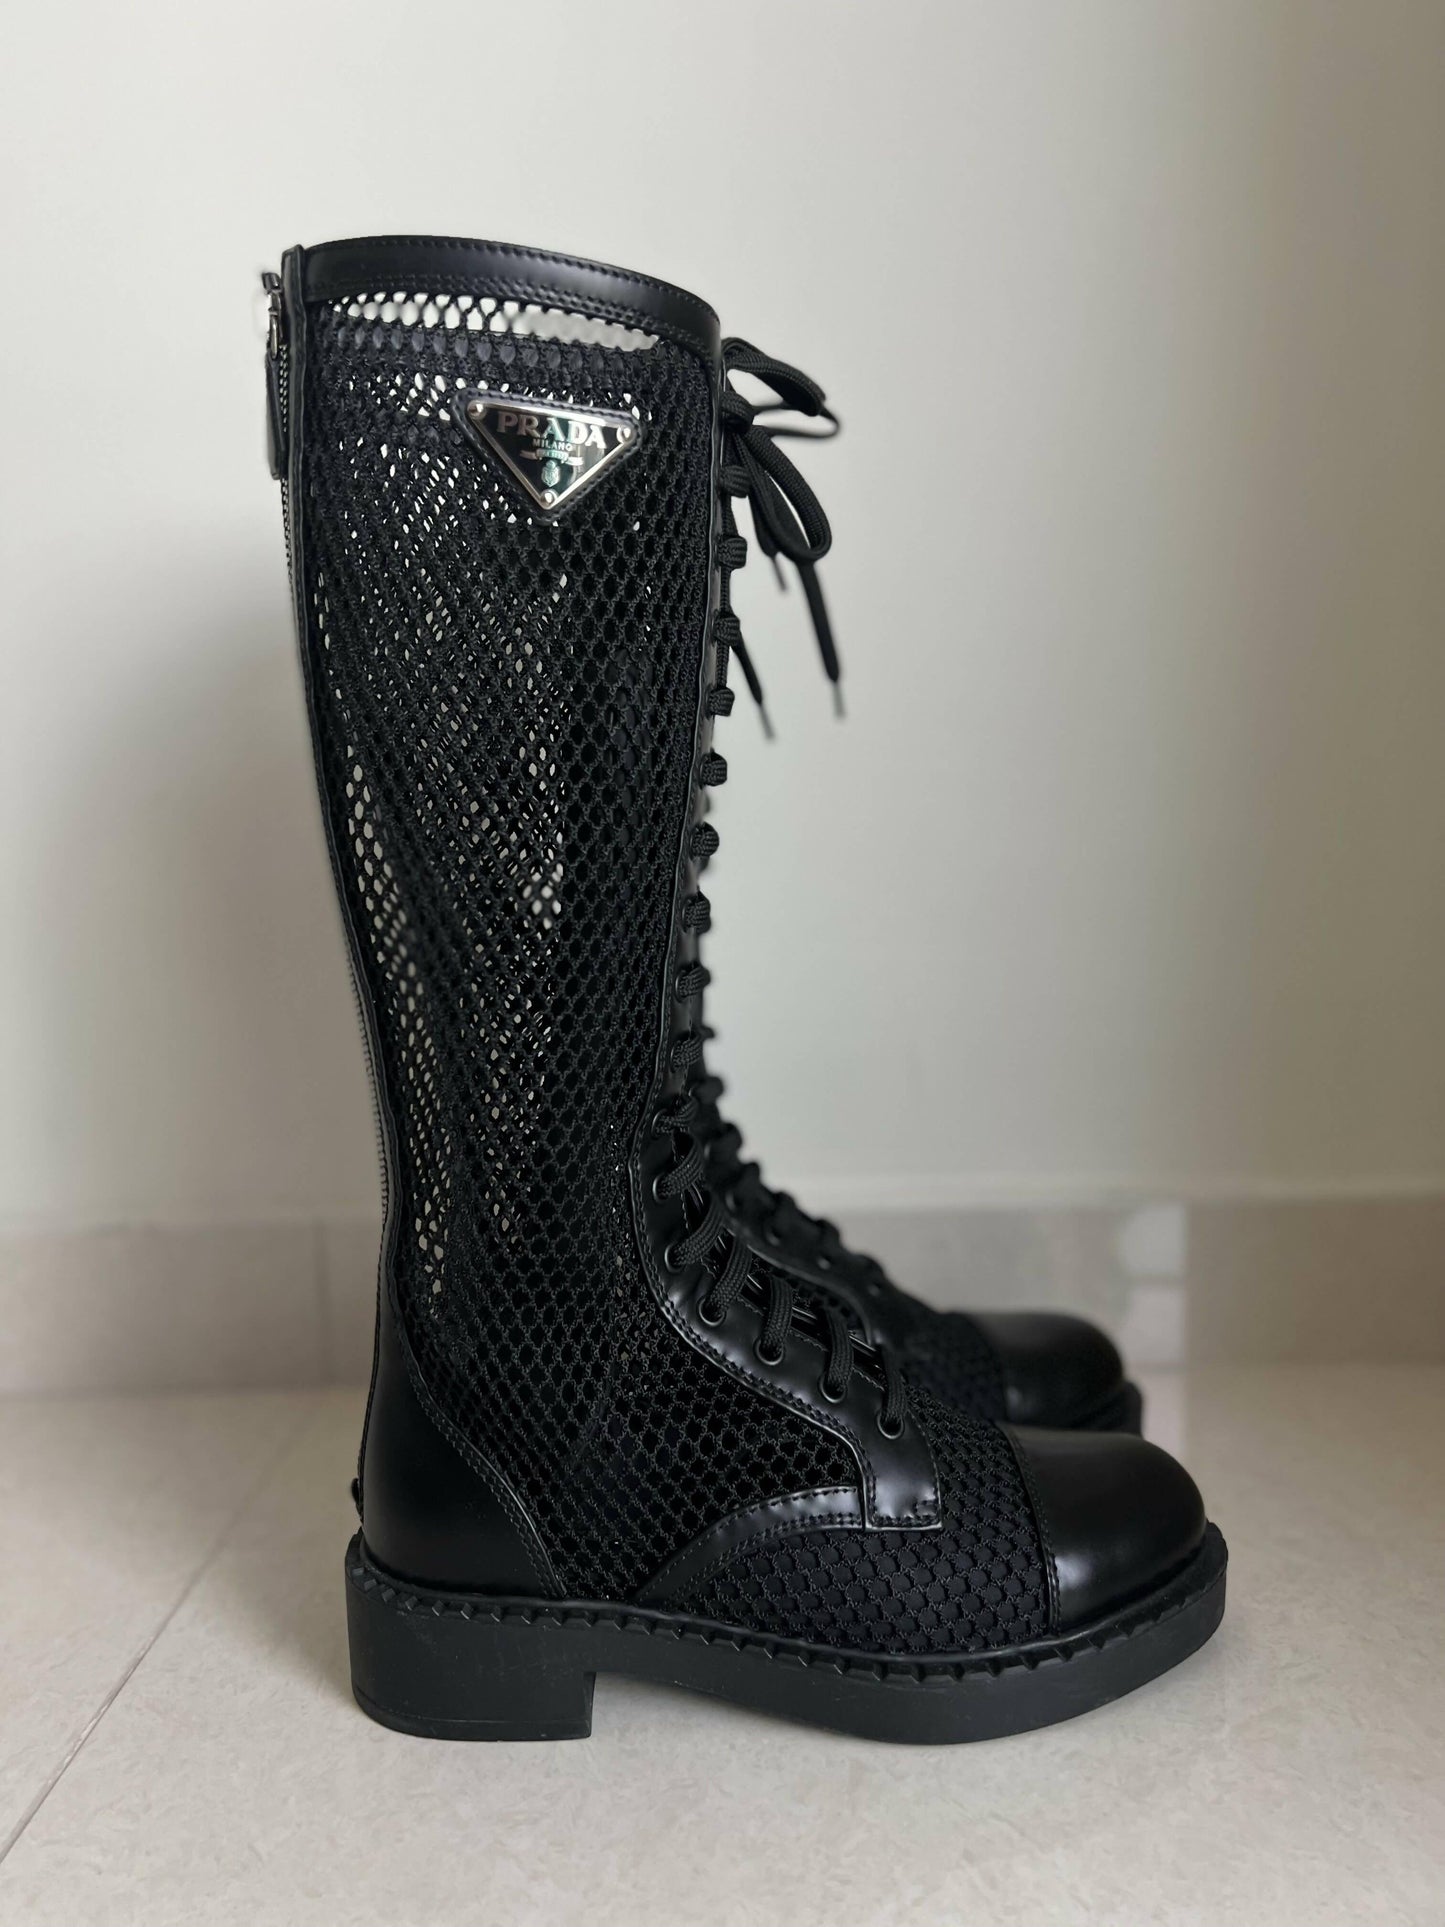 Brushed Leather & Mesh Boots - Endless